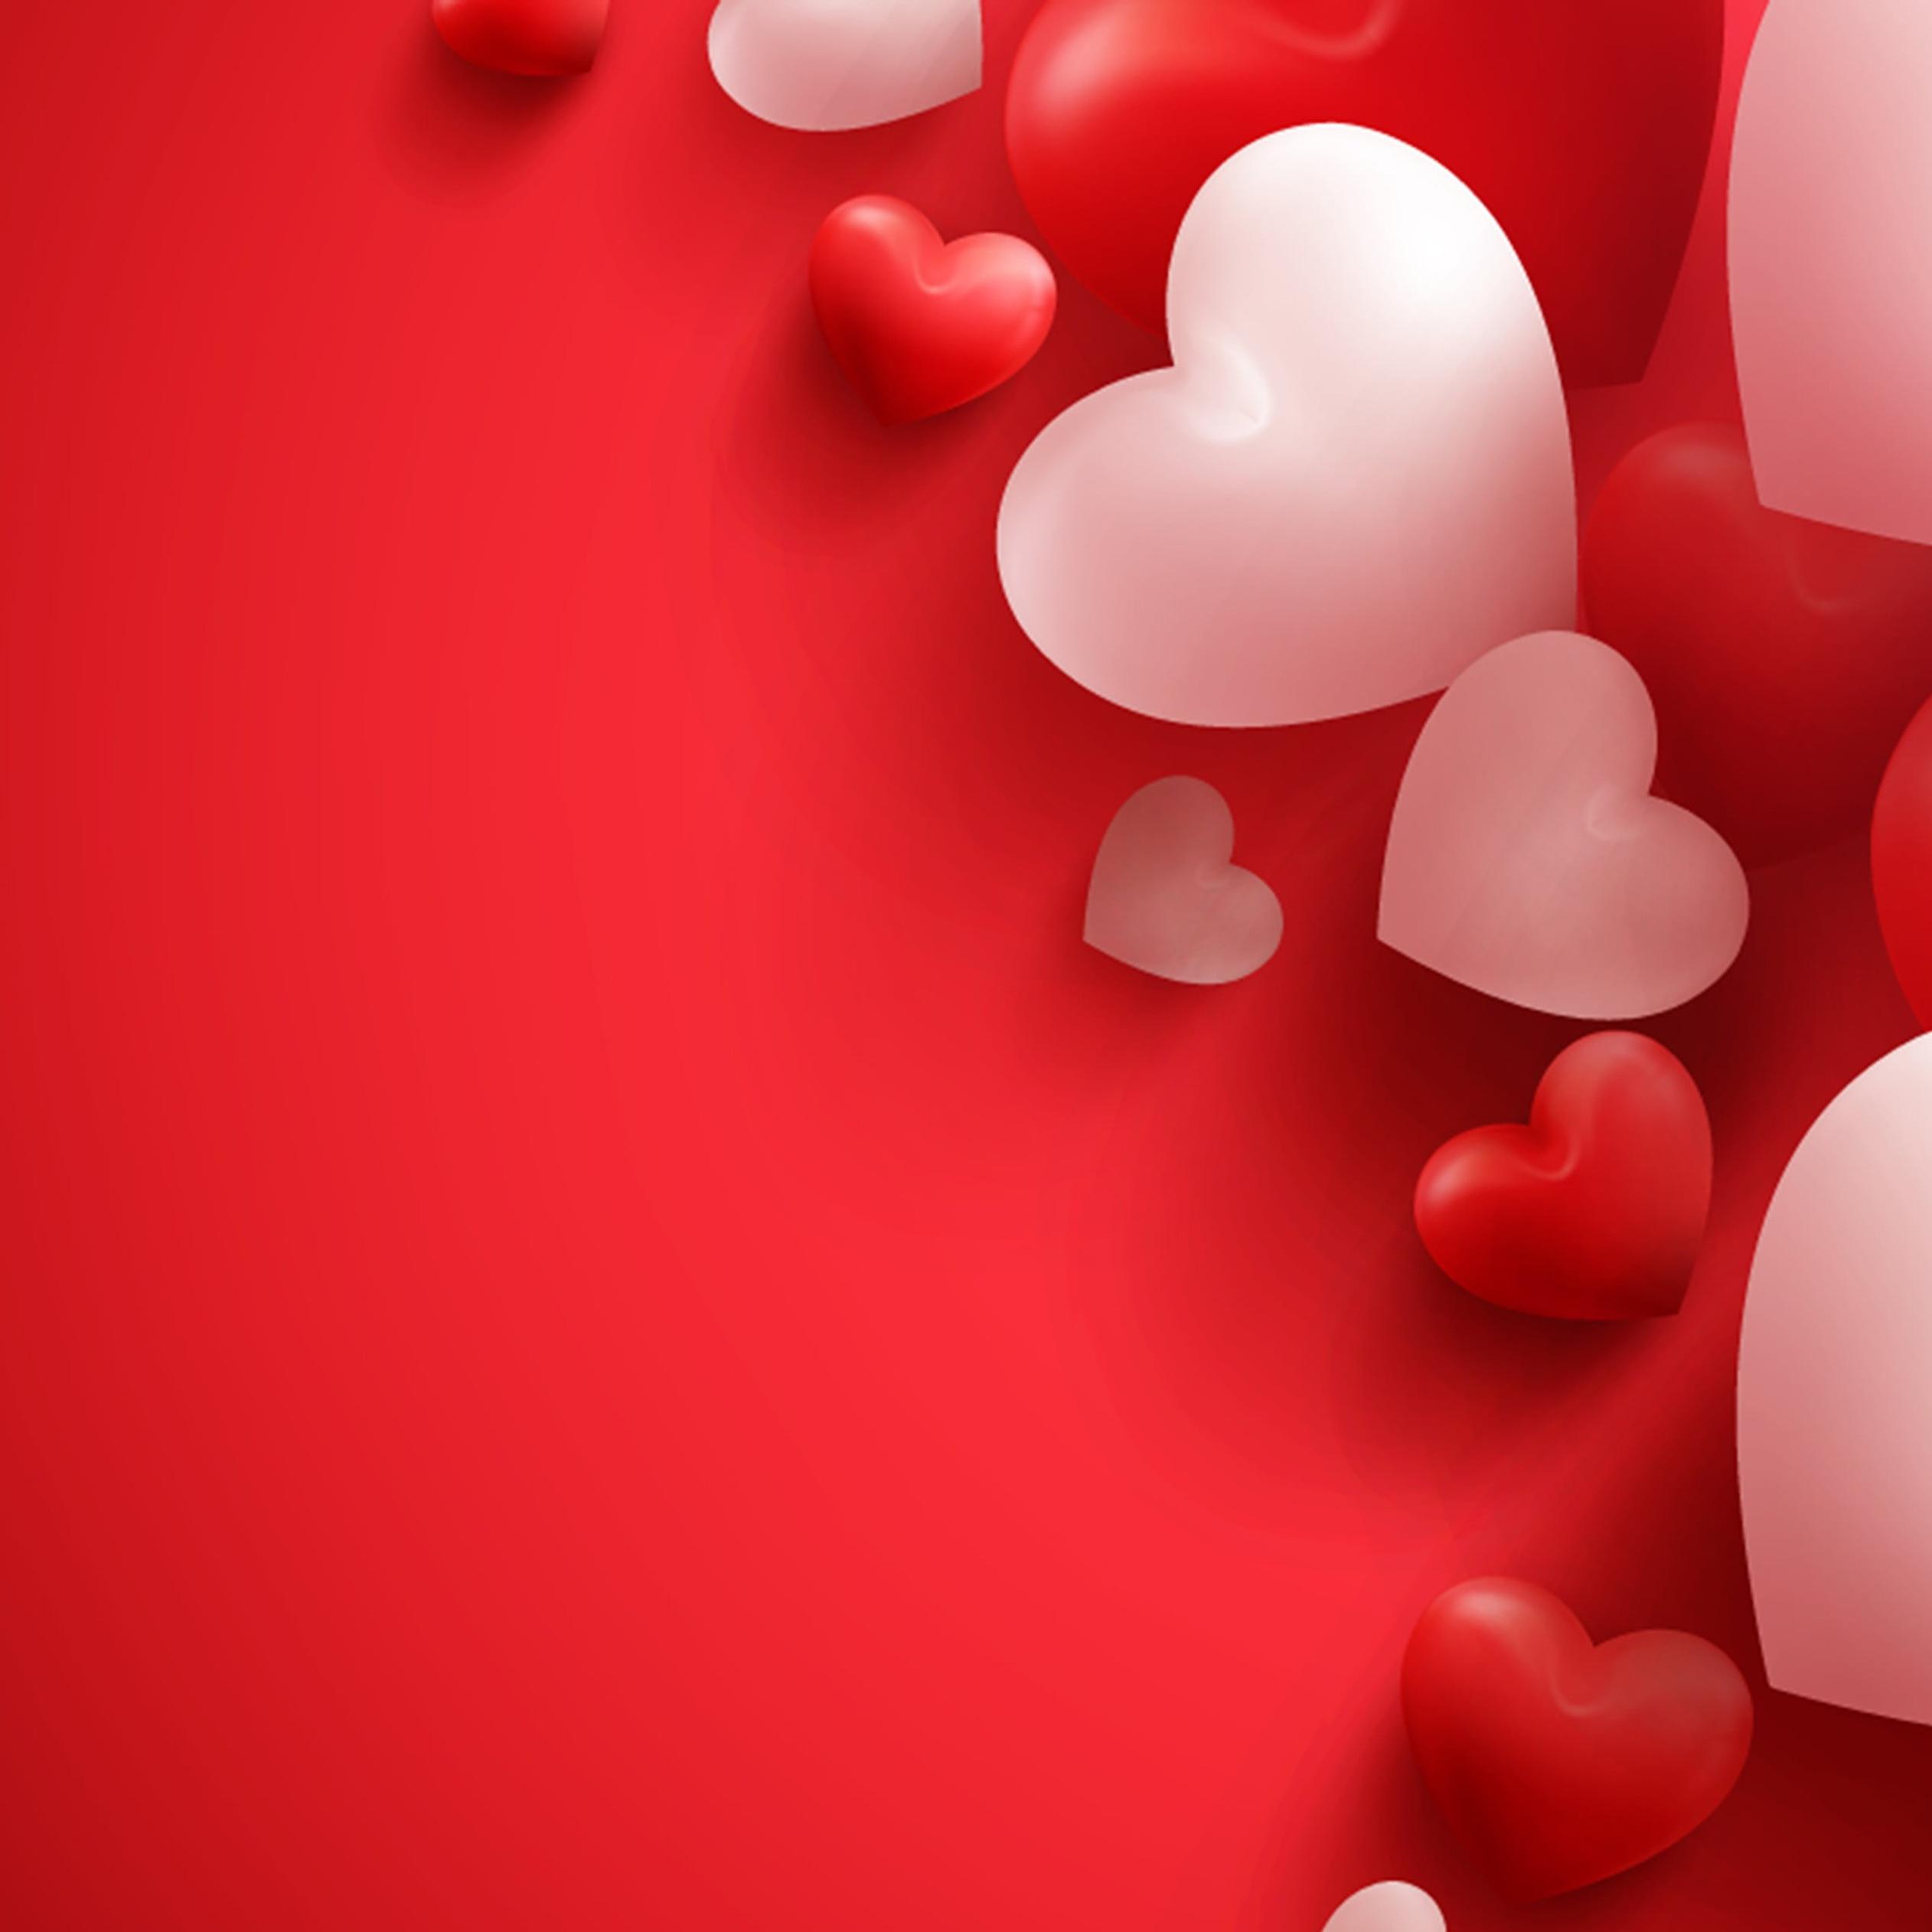 Love wallpaper with red and white hearts - Valentines Day